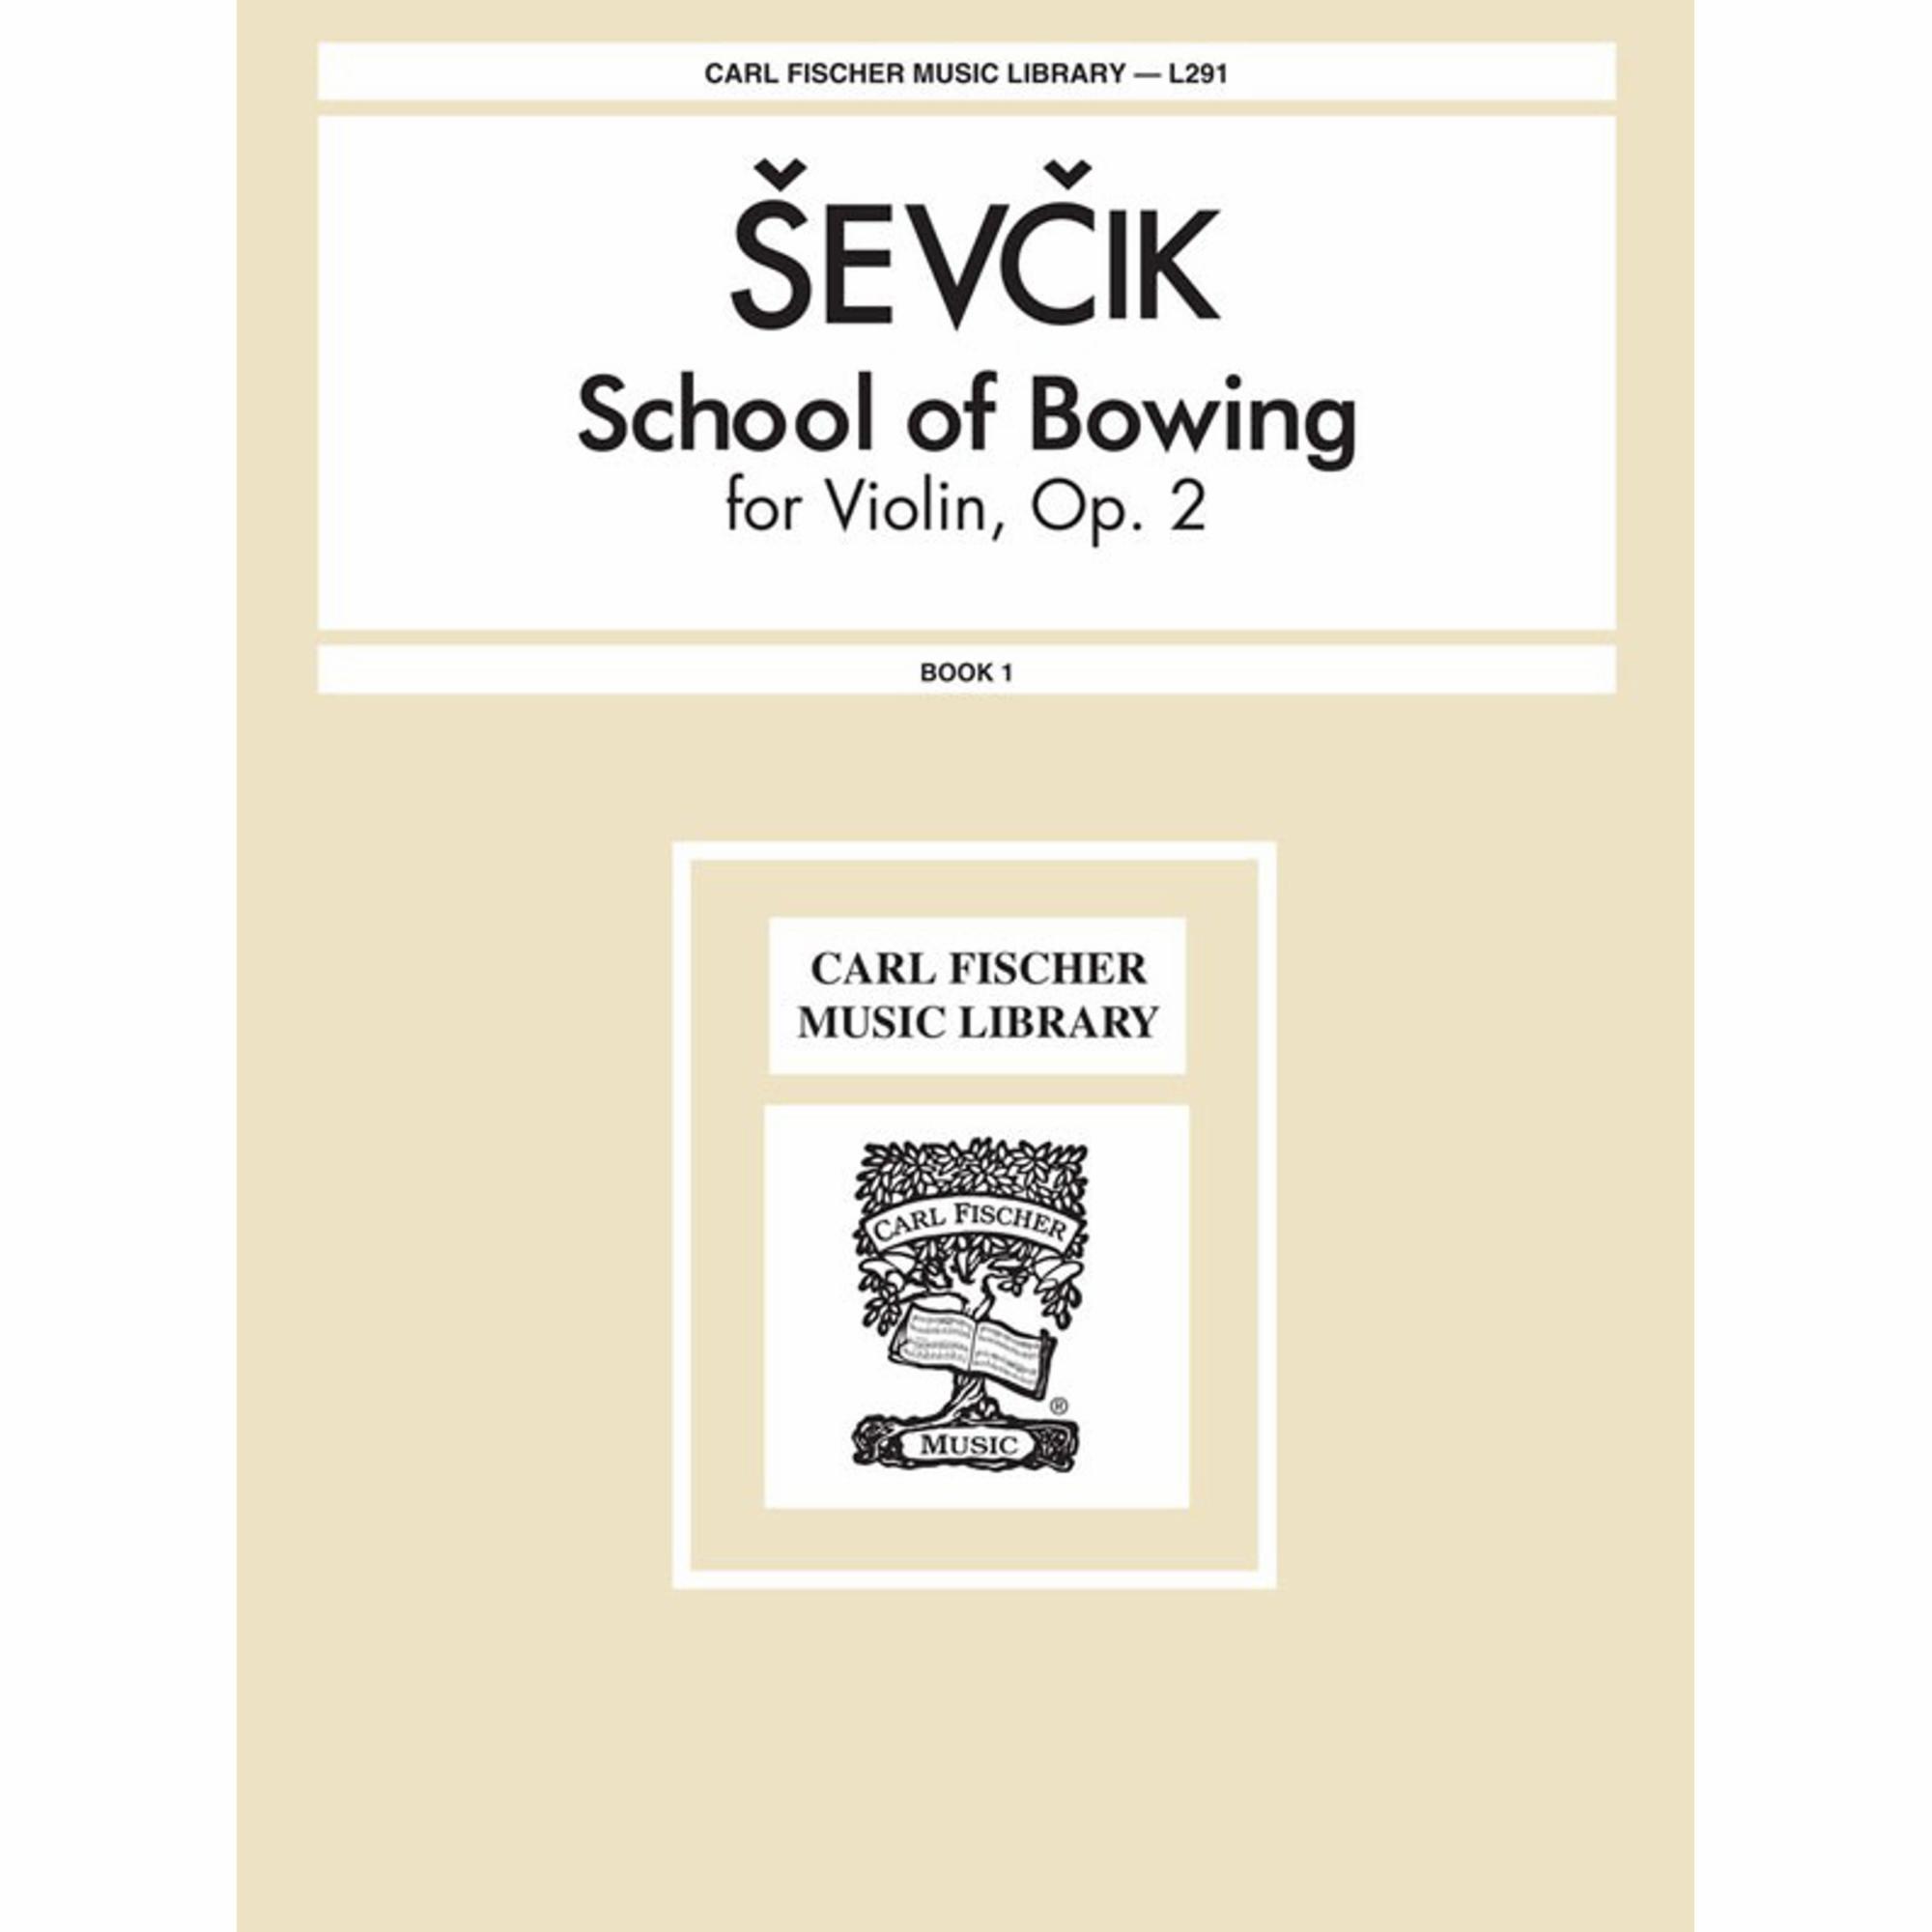 Sevcik -- School of Bowing, Op. 2, Book 1 for Violin